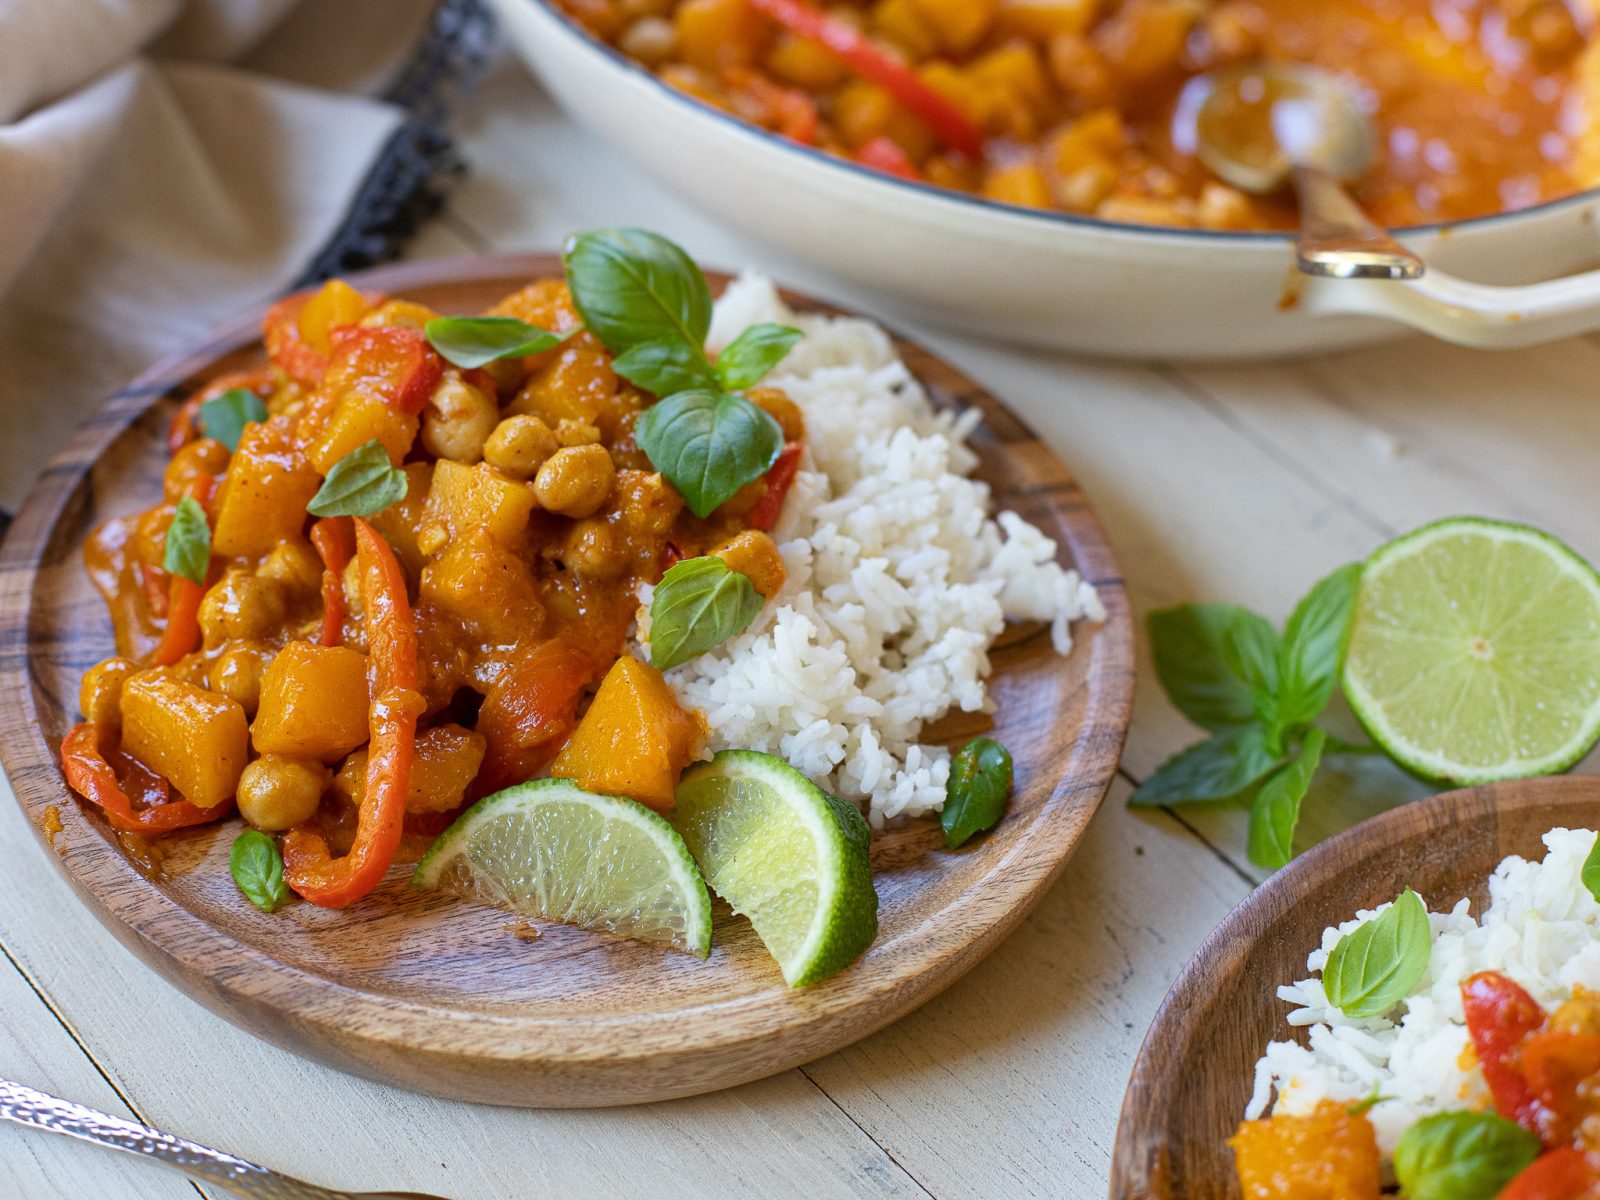 Easy Butternut & Chickpea Curry – Easy, Economical & Delicious Meal That’s Ready In A Flash!